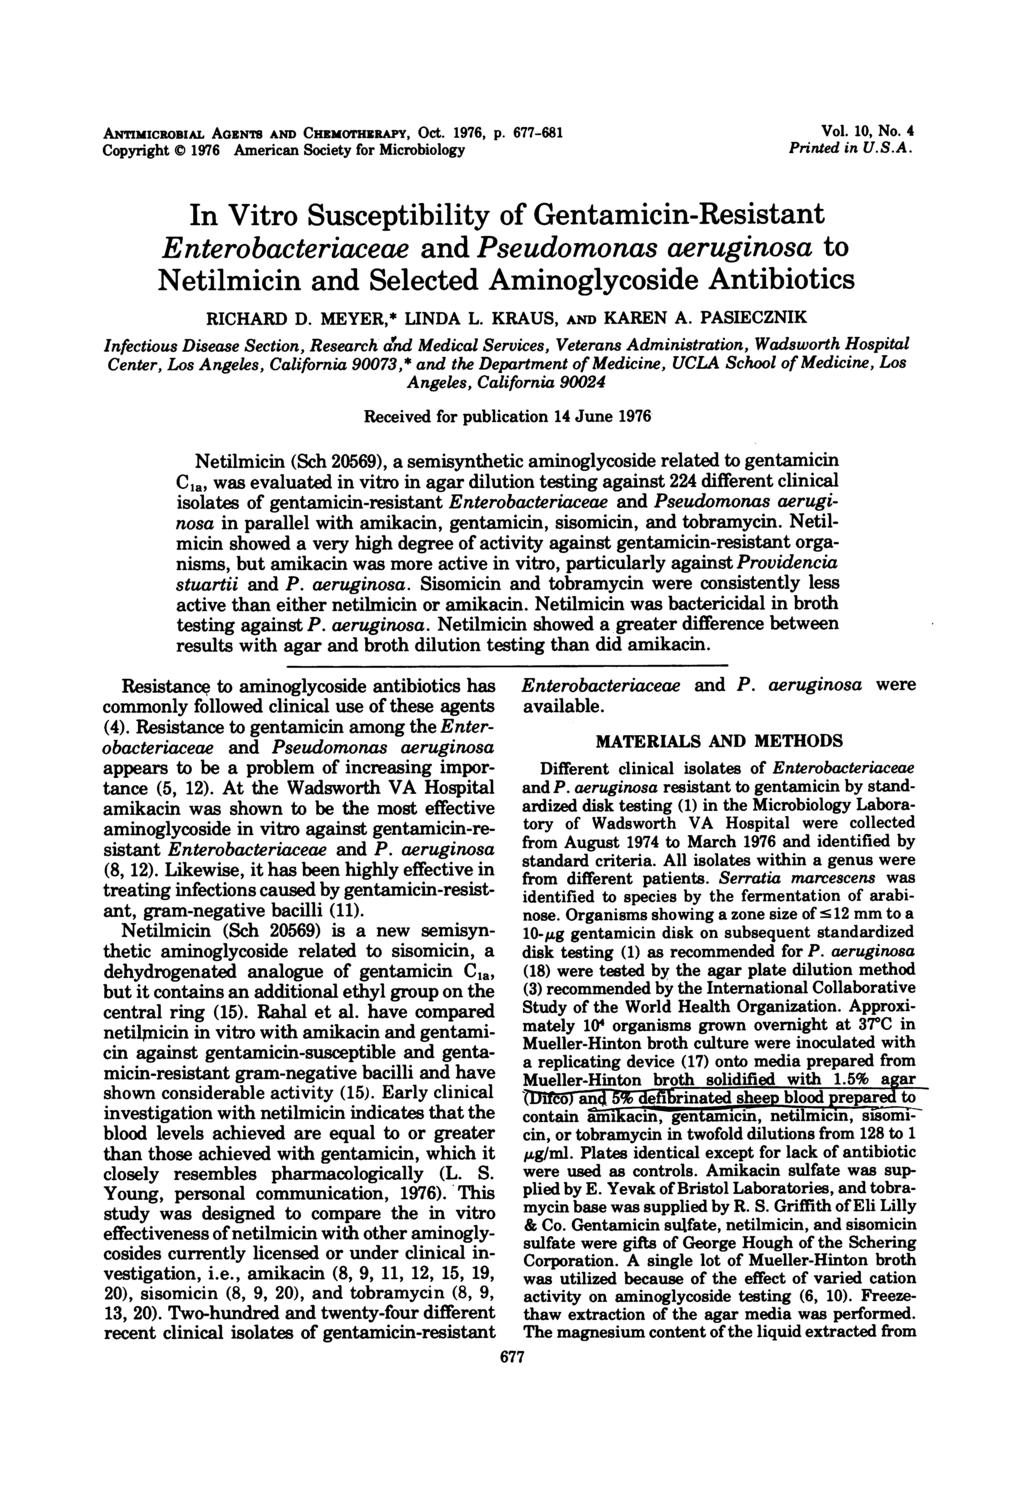 ANTimICROBIAL AGENTh AND CHEMOTHERAPY, OCt. 1976, p. 677-681 Copyright 1976 American Society for Microbiology Vol. 10, No. 4 Printed in U.S.A. In Vitro Susceptibility of Gentamicin-Resistant Enterobacteriaceae and Pseudomonas aeruginosa to Netilmicin and Selected Aminoglycoside Antibiotics RICHARD D.